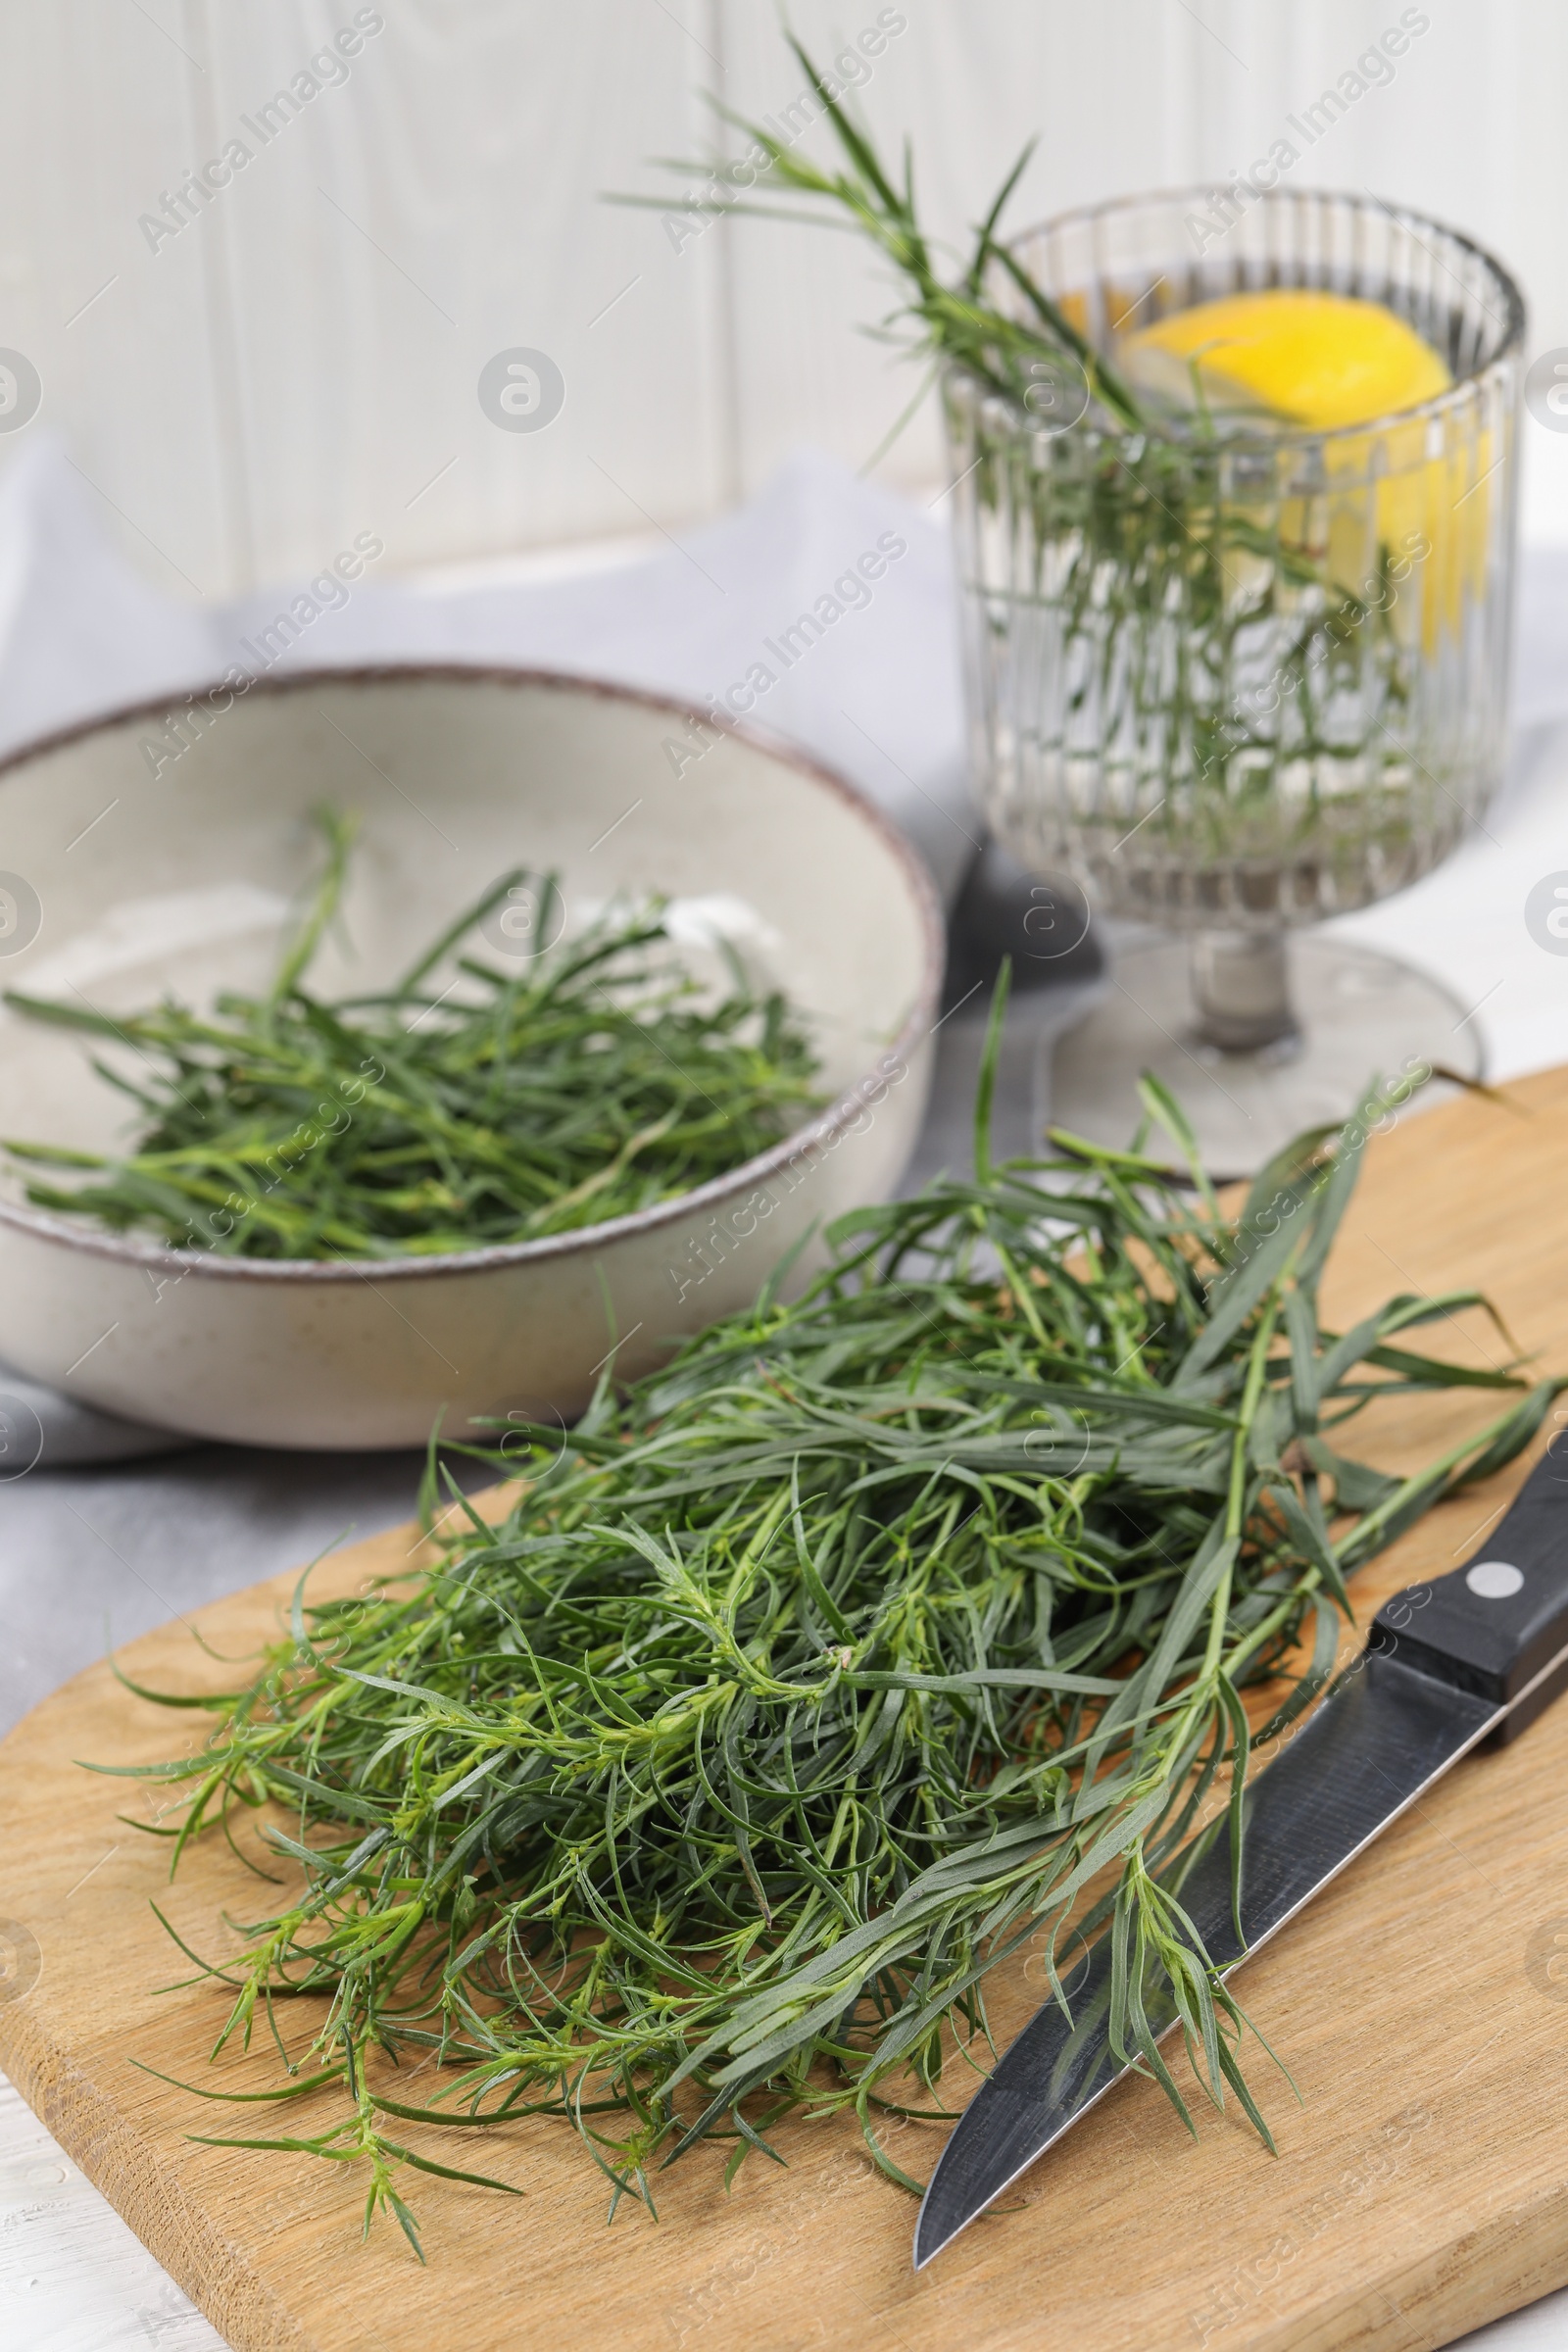 Photo of Fresh tarragon sprigs and knife on wooden board, closeup